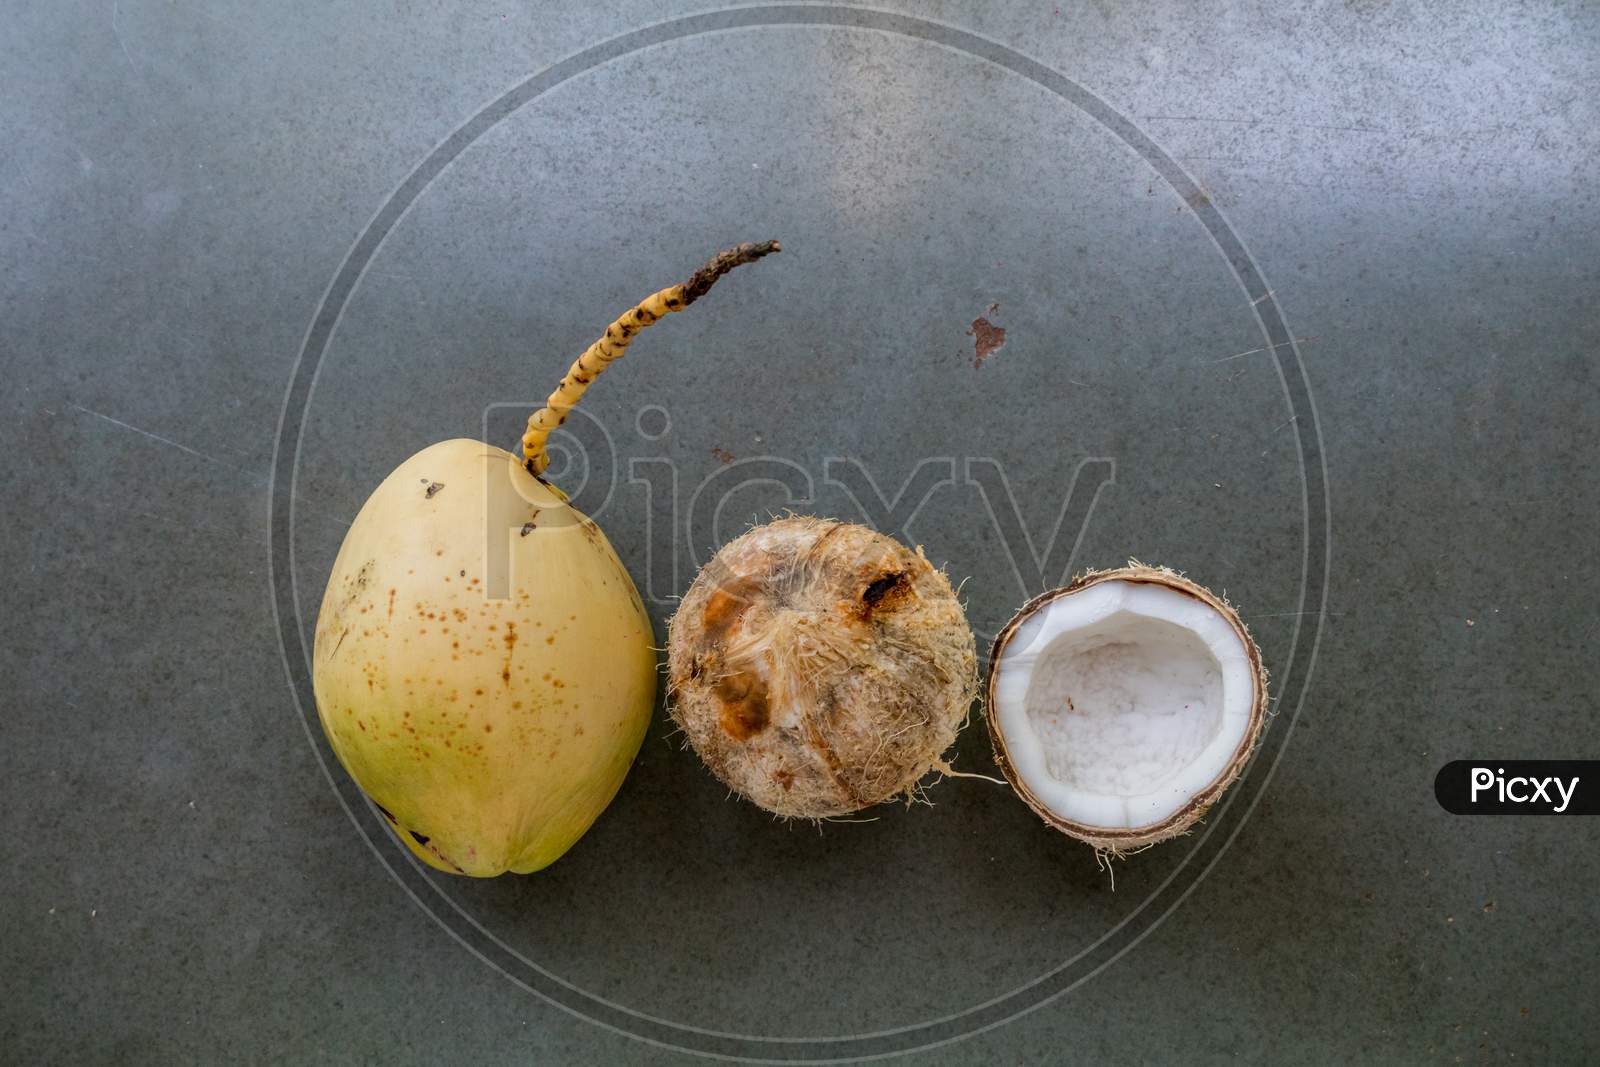 Coconut In Three Forms Tender, Pealed And Cracked